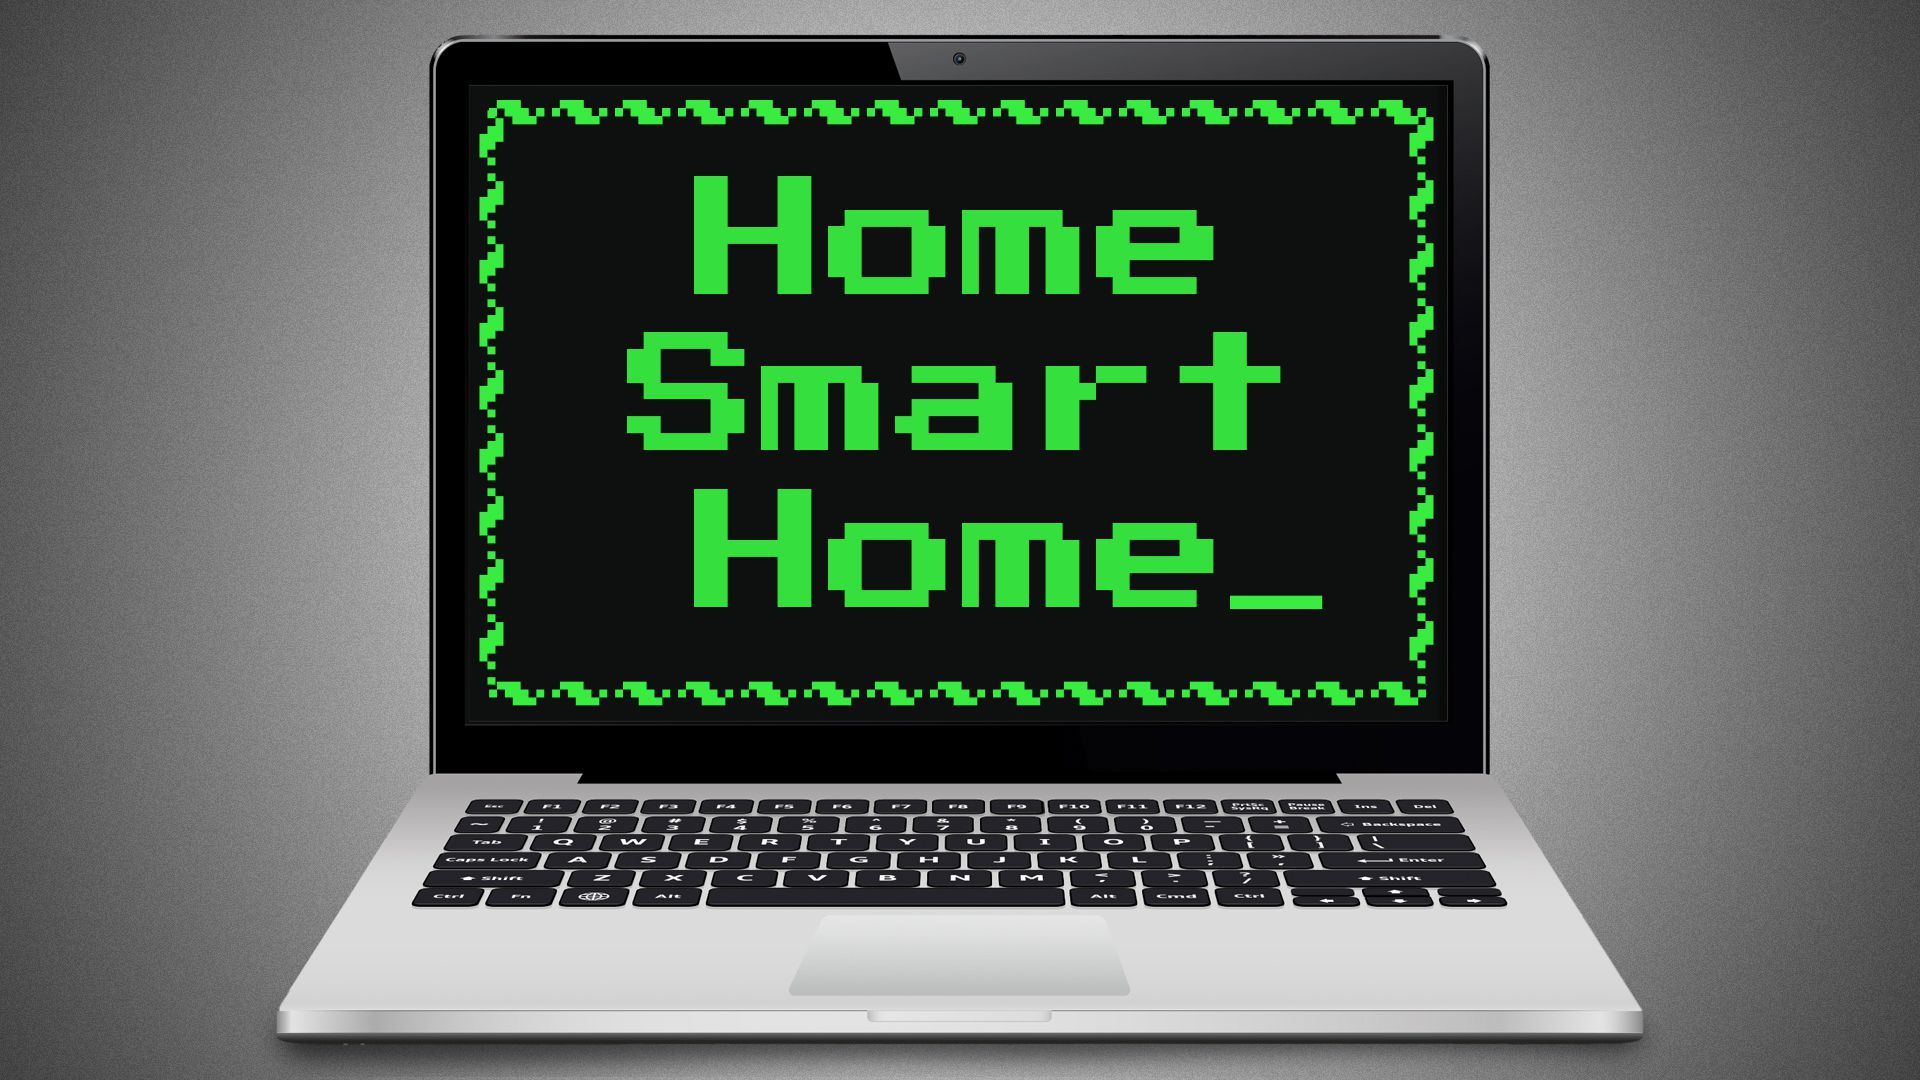 Illustration of “Home Smart Home” on a computer screen.